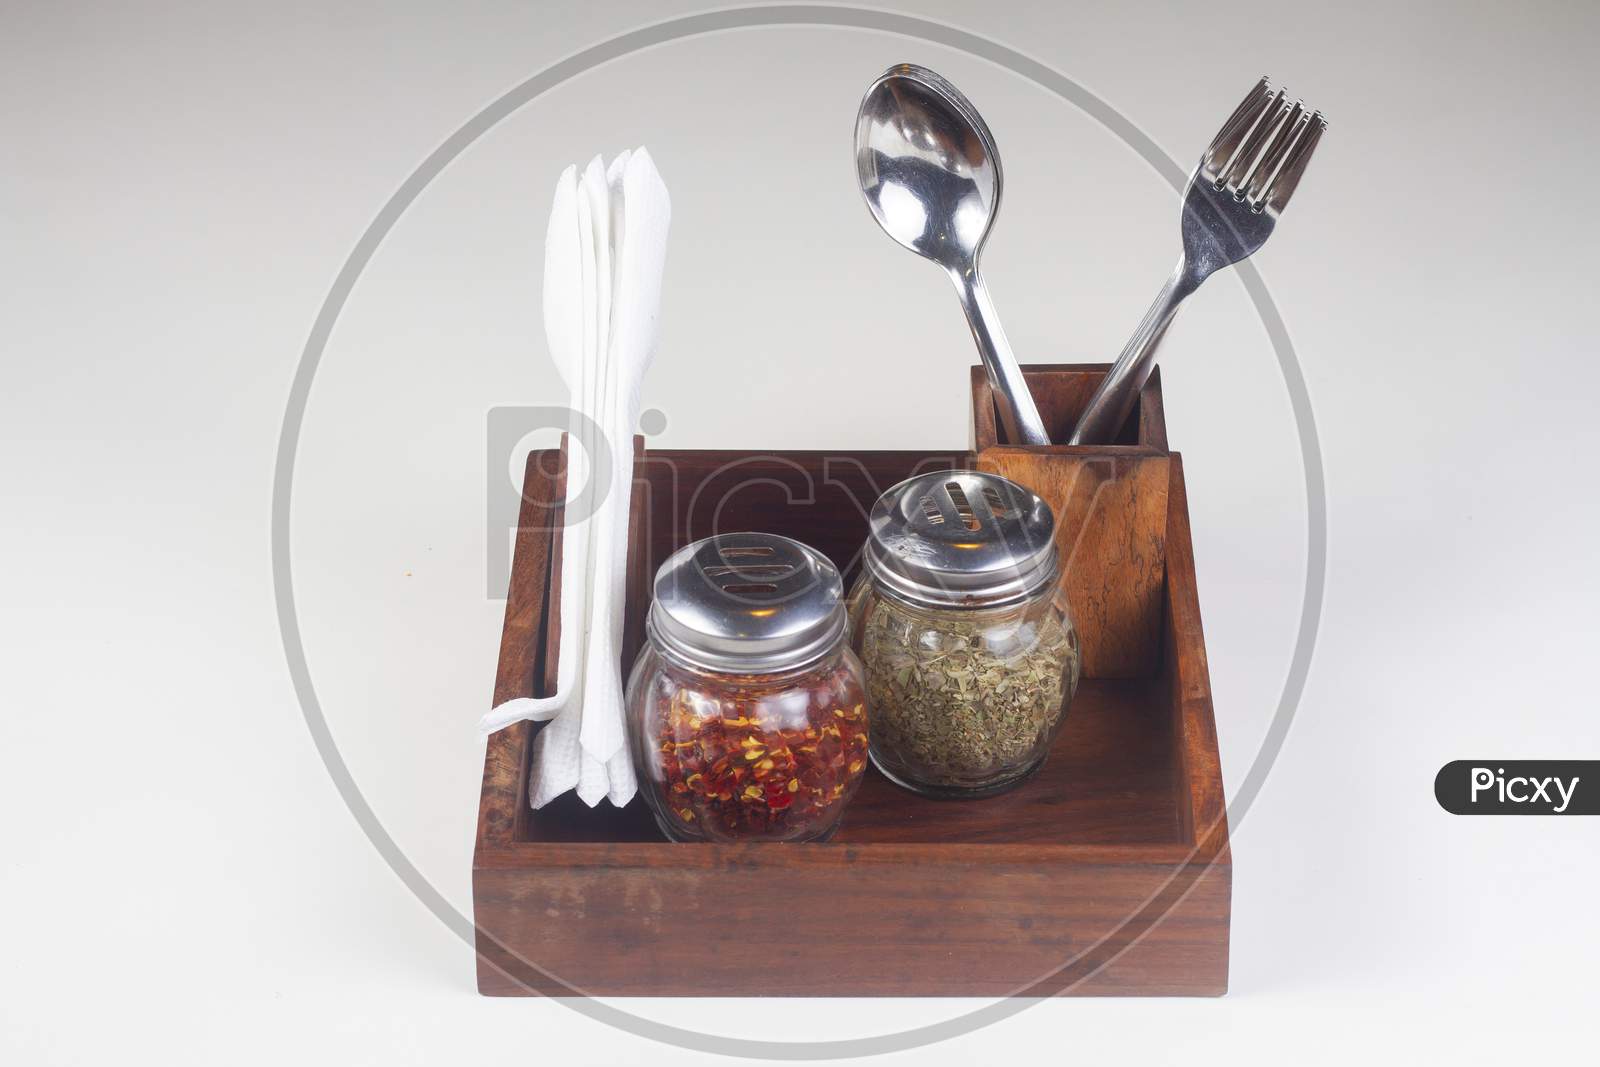 Restaurant Spoon And Fork Holder. Chili Flakes, Oregano Jar And Tissue Paper Inside A Box